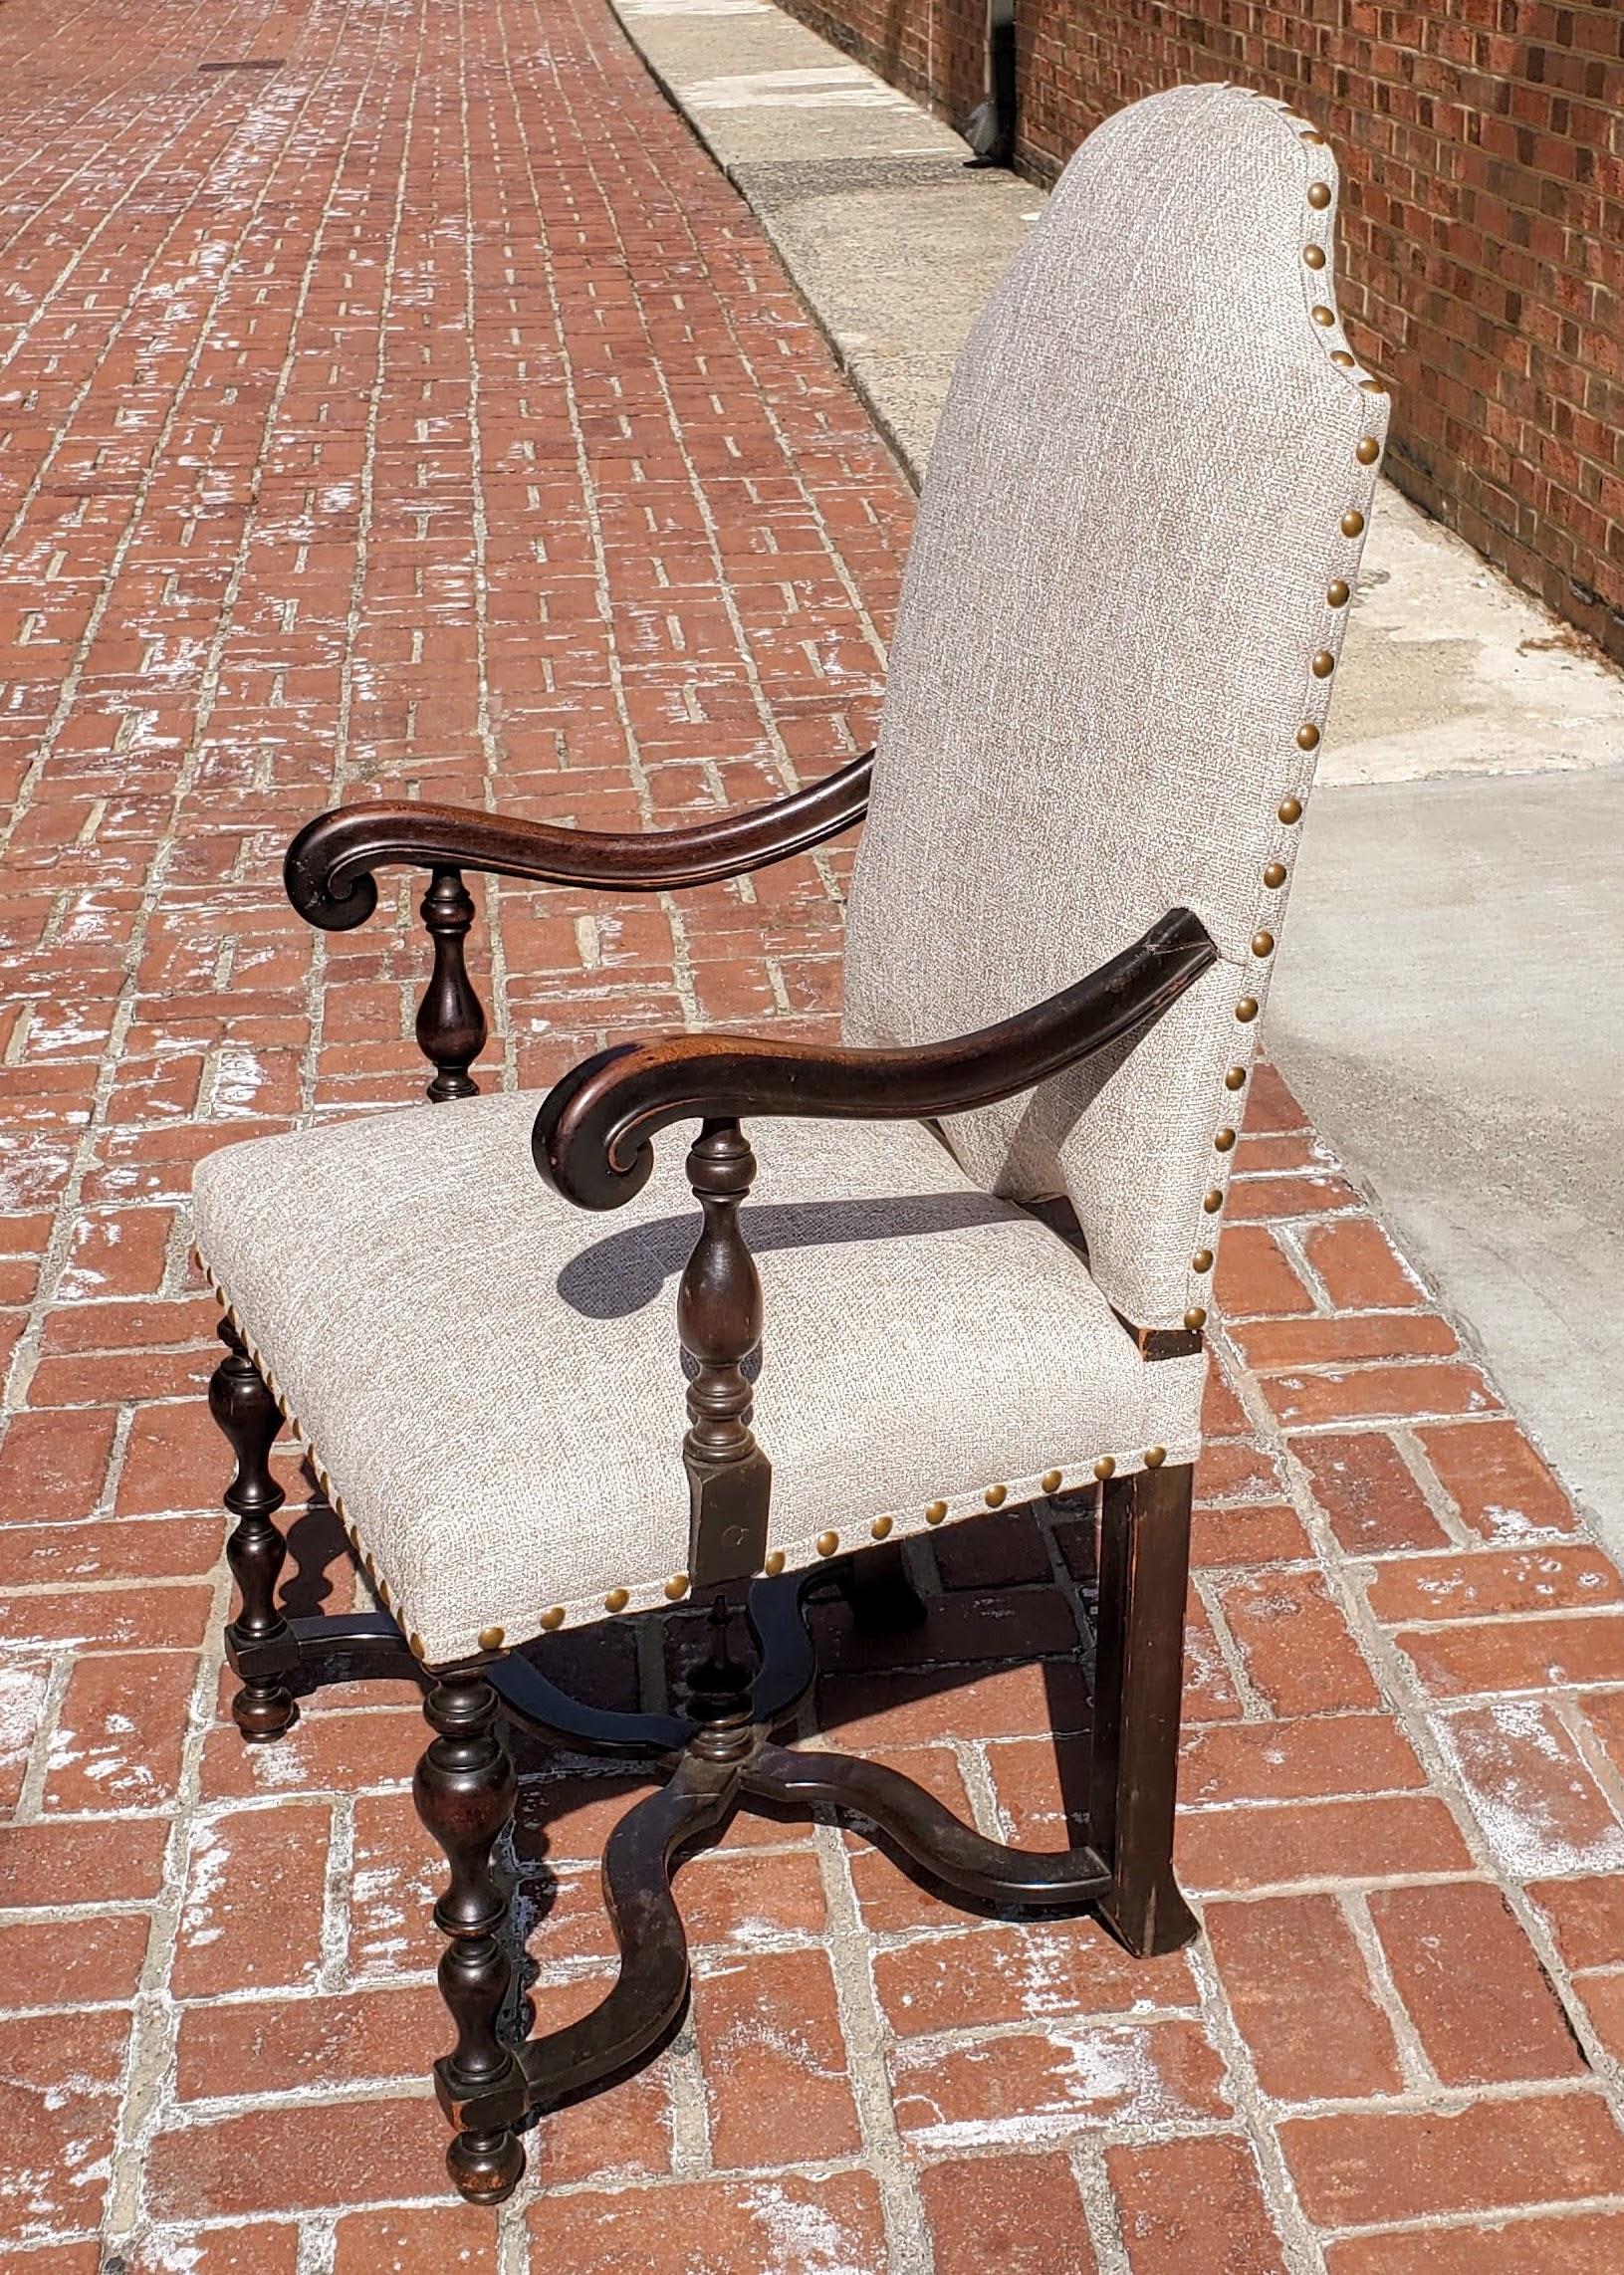 Lovely 19th century Baroque style french armchair. Made of richly patinated walnut with decoratively shaped backs. Two scrolled arms and turned legs with shaped “X” stretchers. Newly upholstered in textured taupe chenille with nailhead decoration.